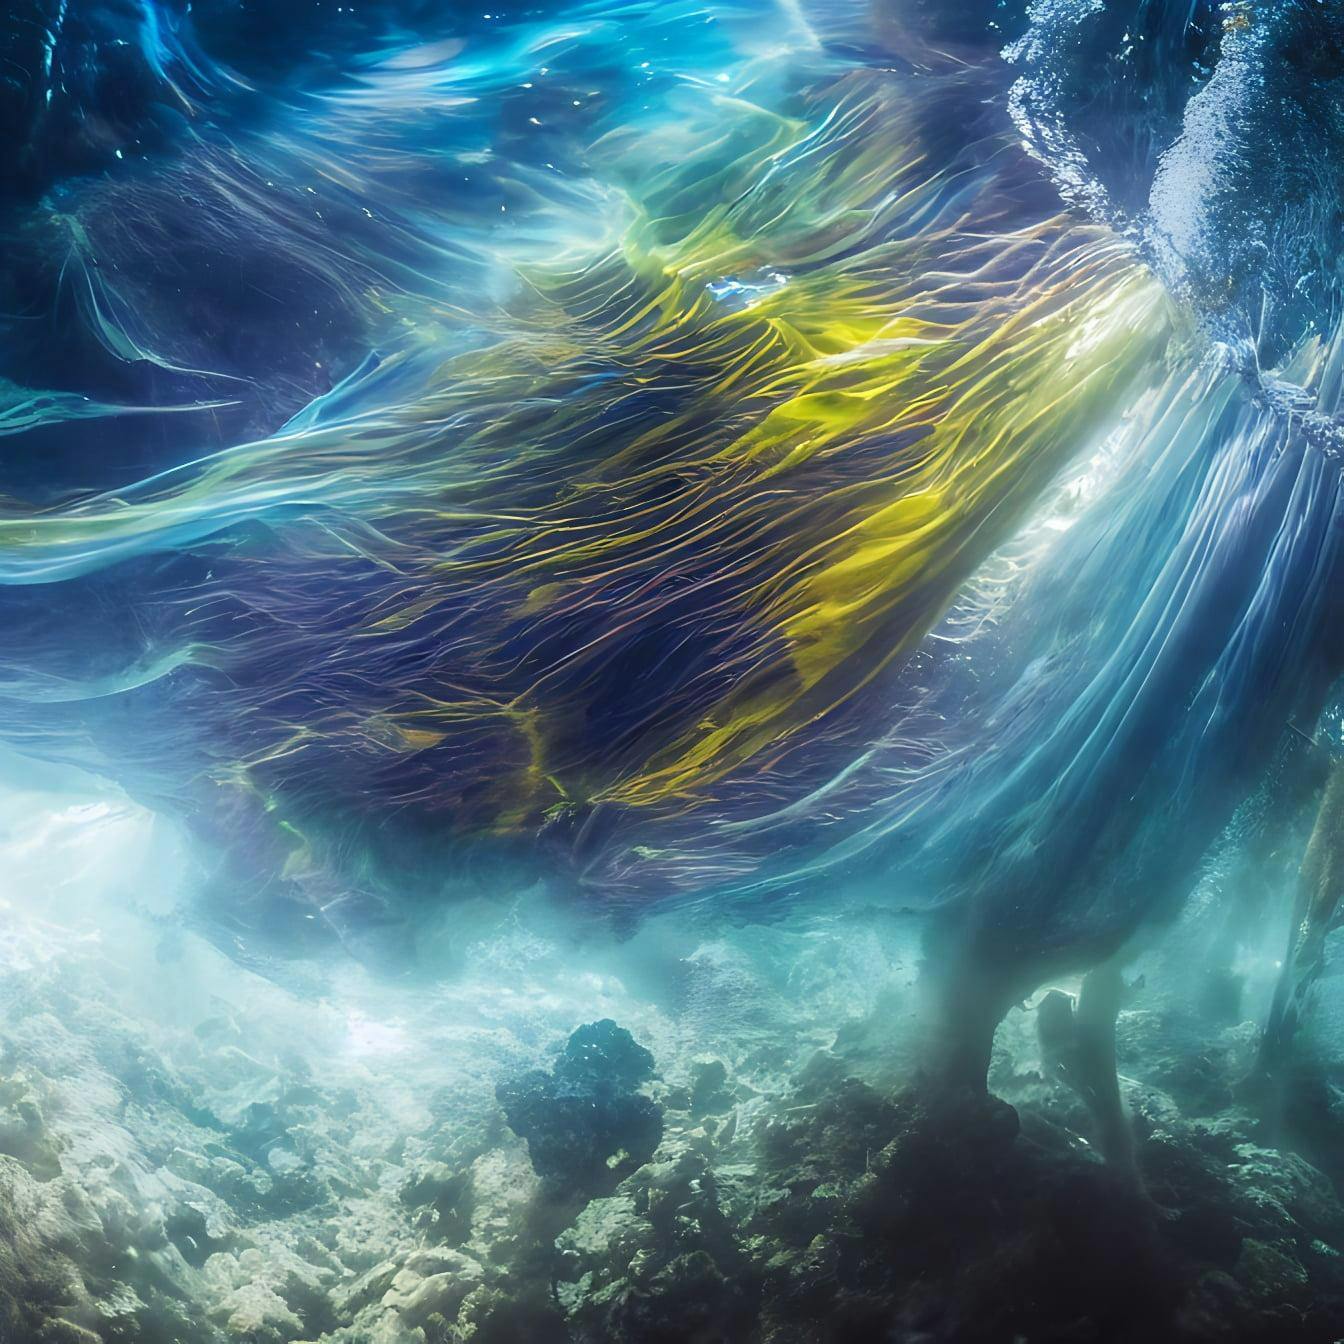 Underwater flowing magical place under sea with visible translucent beautiful waves trough which you can see the multicoloured universe and galaxies